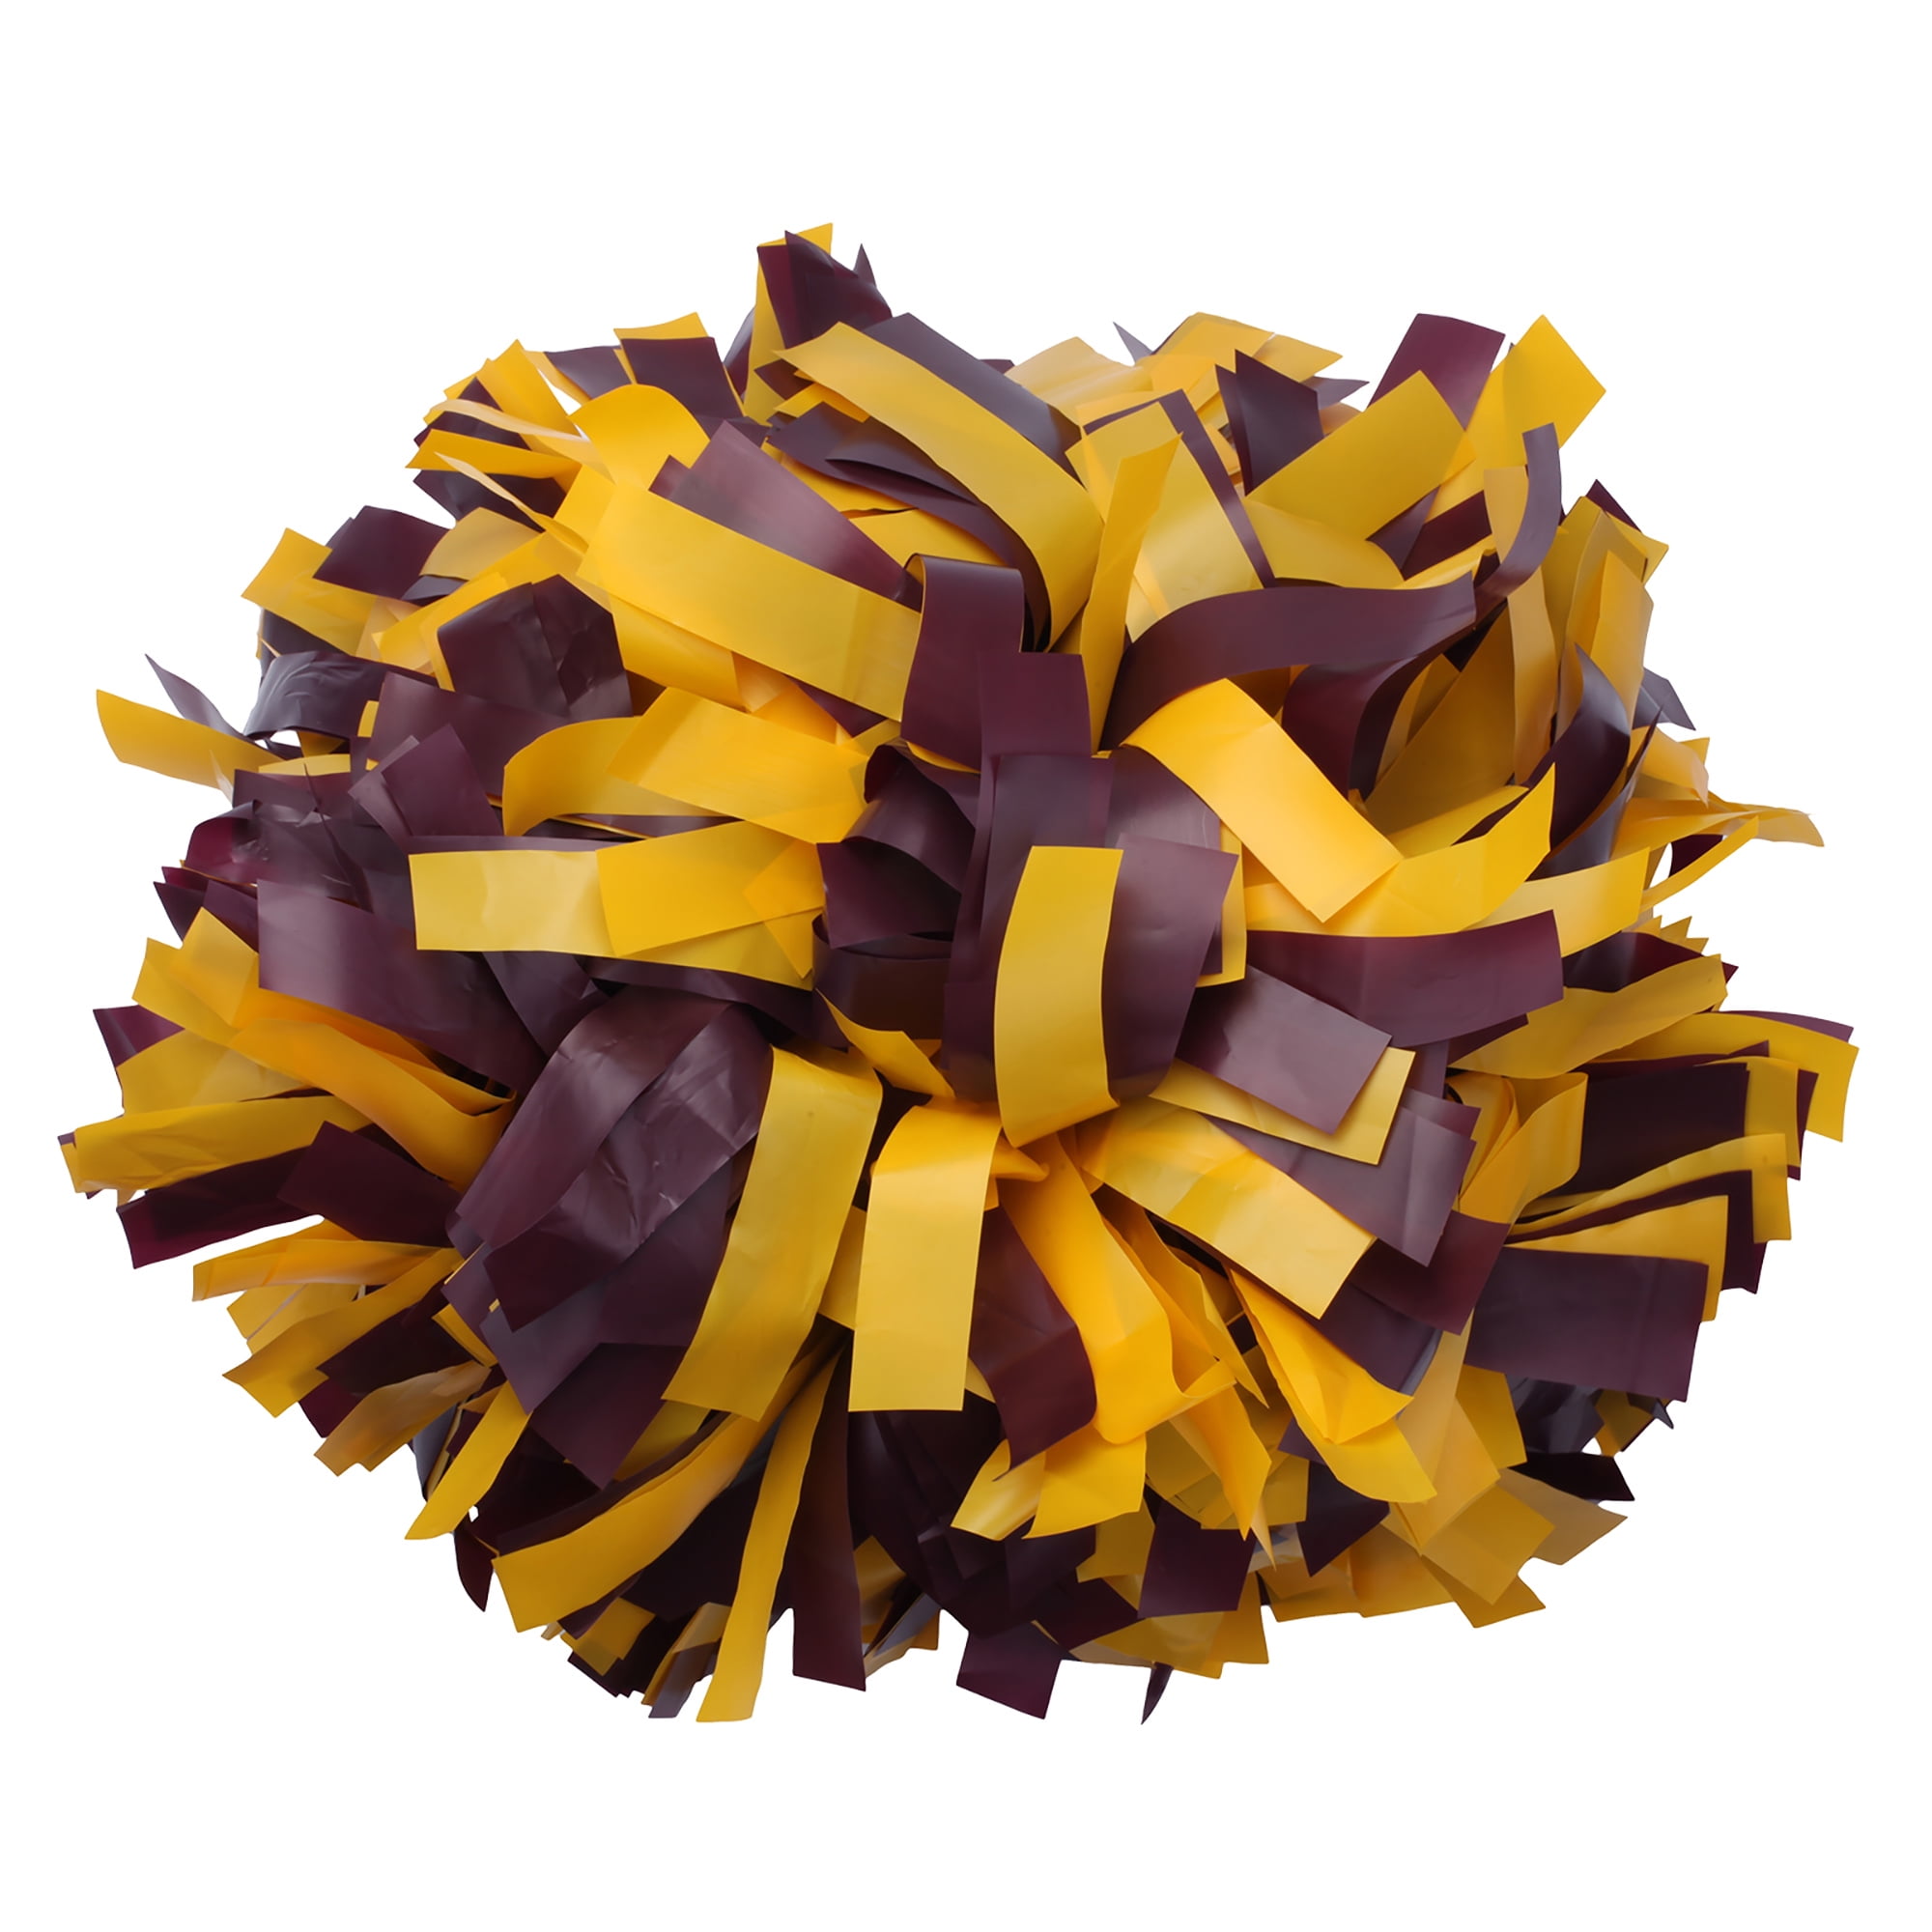 Lovecheer 2PCS Cheerleading Pom Poms Purple and White Plastic Pompoms with  Baton Handle for Sports Party Team Spirit Cheering Gifts - Yahoo Shopping